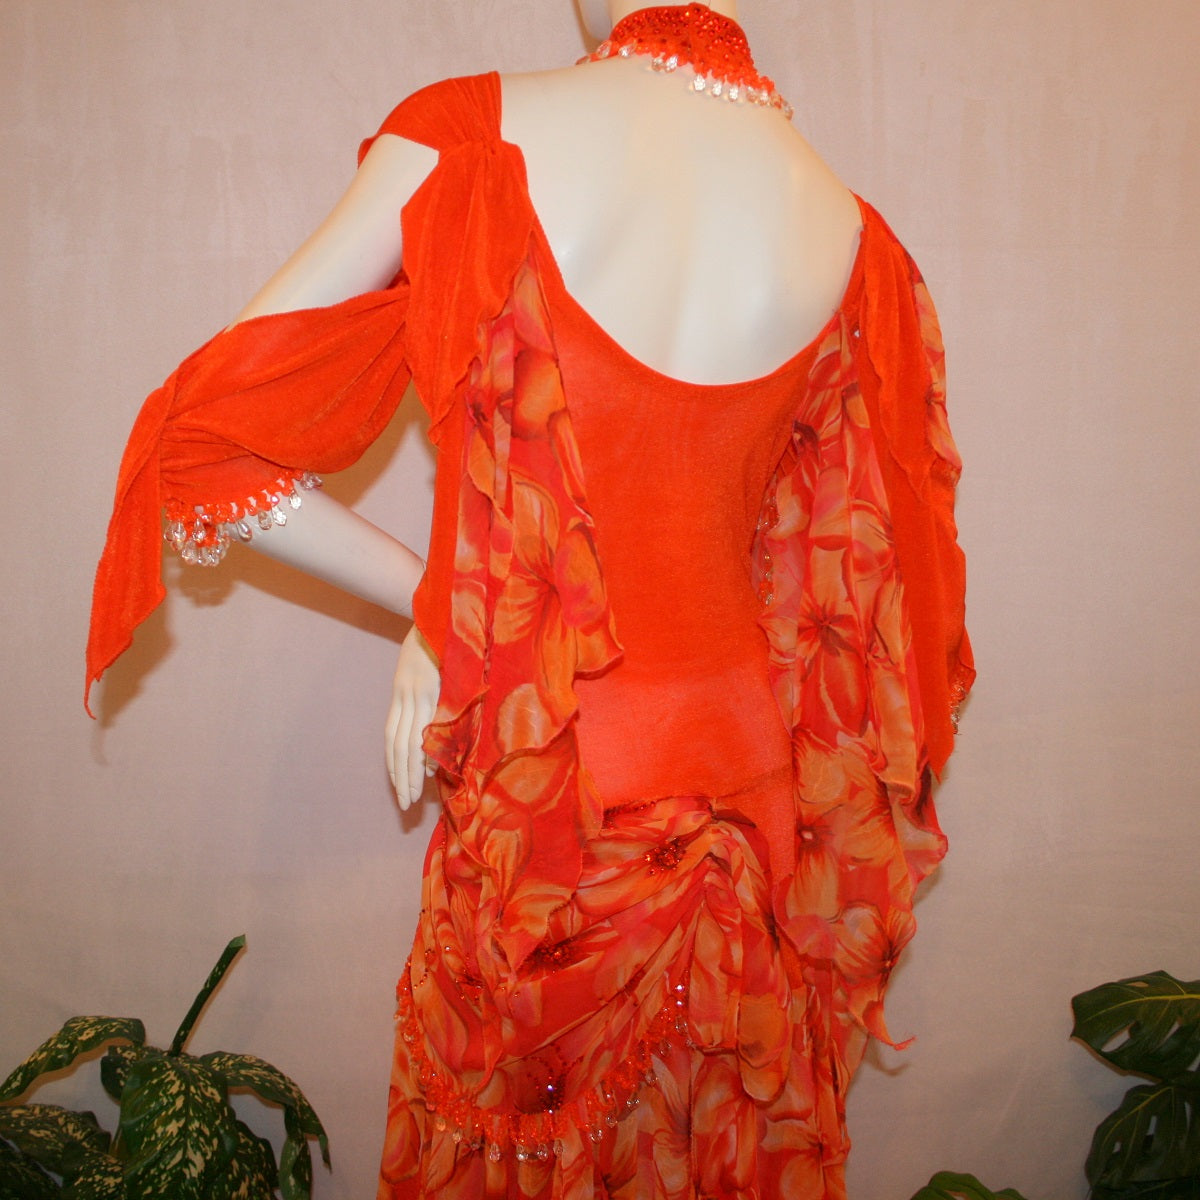 upper back view of Orange ballroom dress with 3/4 cold shoulder, billowy sleeves, created of luxurious orange solid slinky & yards of an orange tropical print textured chiffon. 